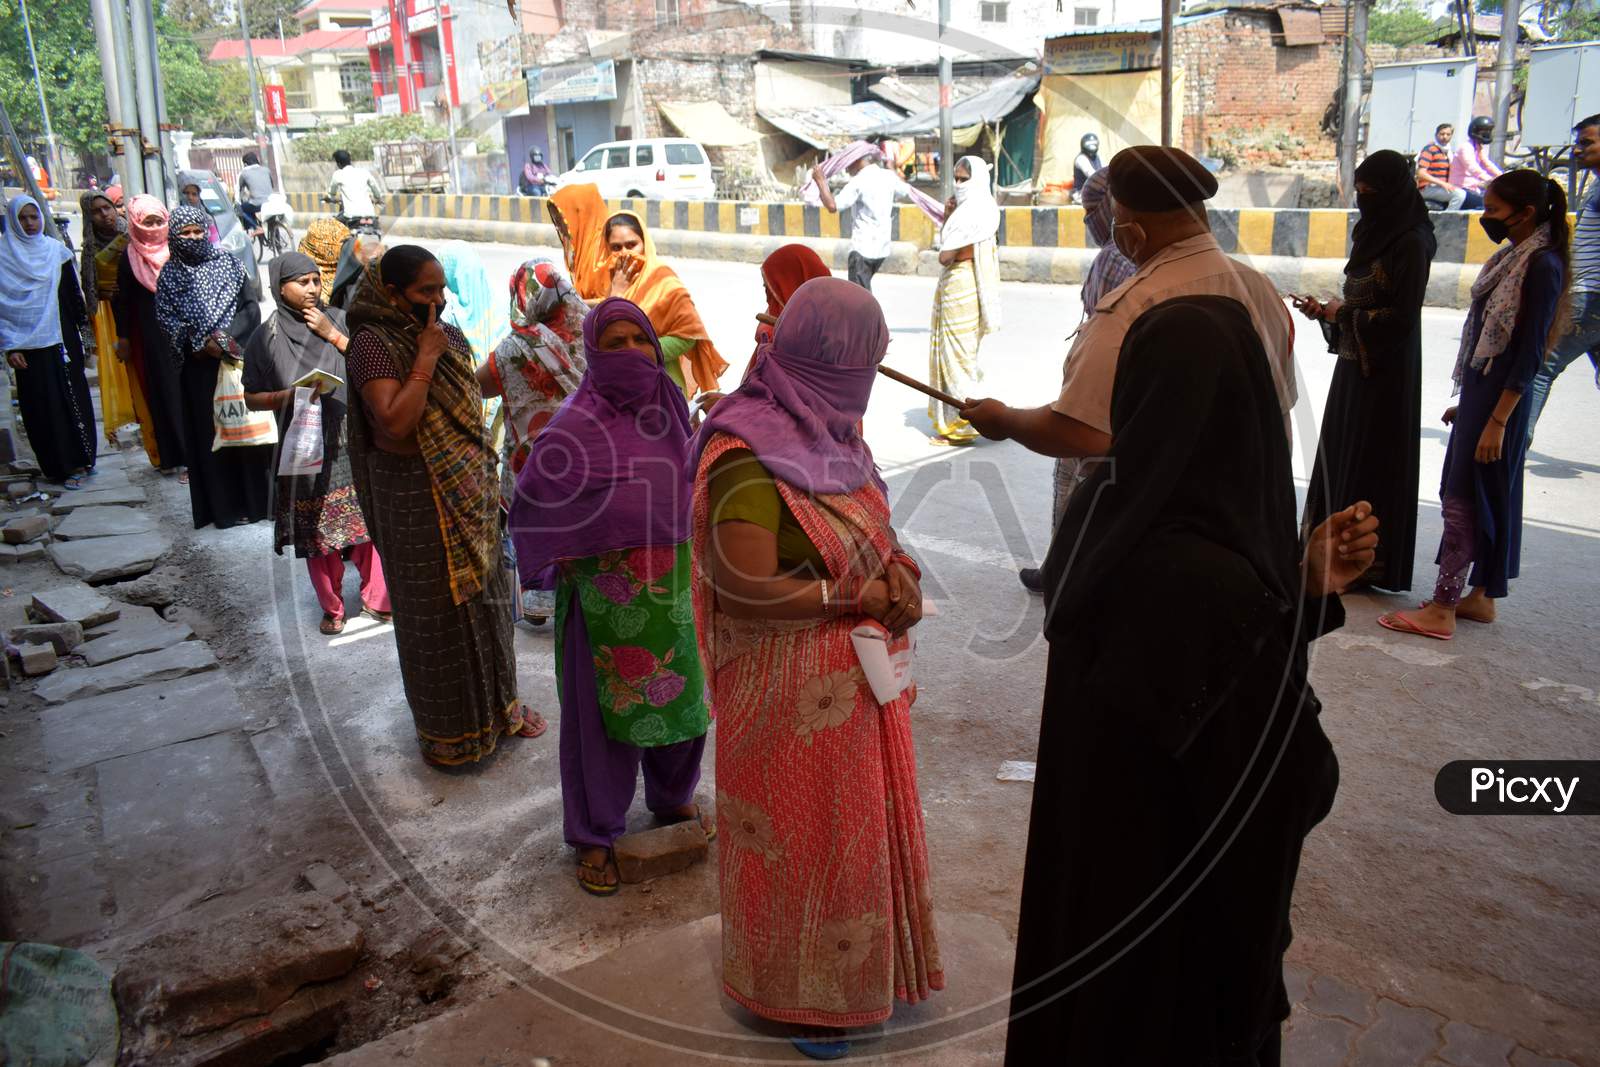 Beneficiaries Lined Up Outside A Ration Shop To Collect Free Food Grains State Government Schemes To Poor People Amid The Complete Lockdown In The Wake Of The Cororavirus  or COVID-19 Pandemic, In Prayagraj, Wednesday, April 15, 2020.